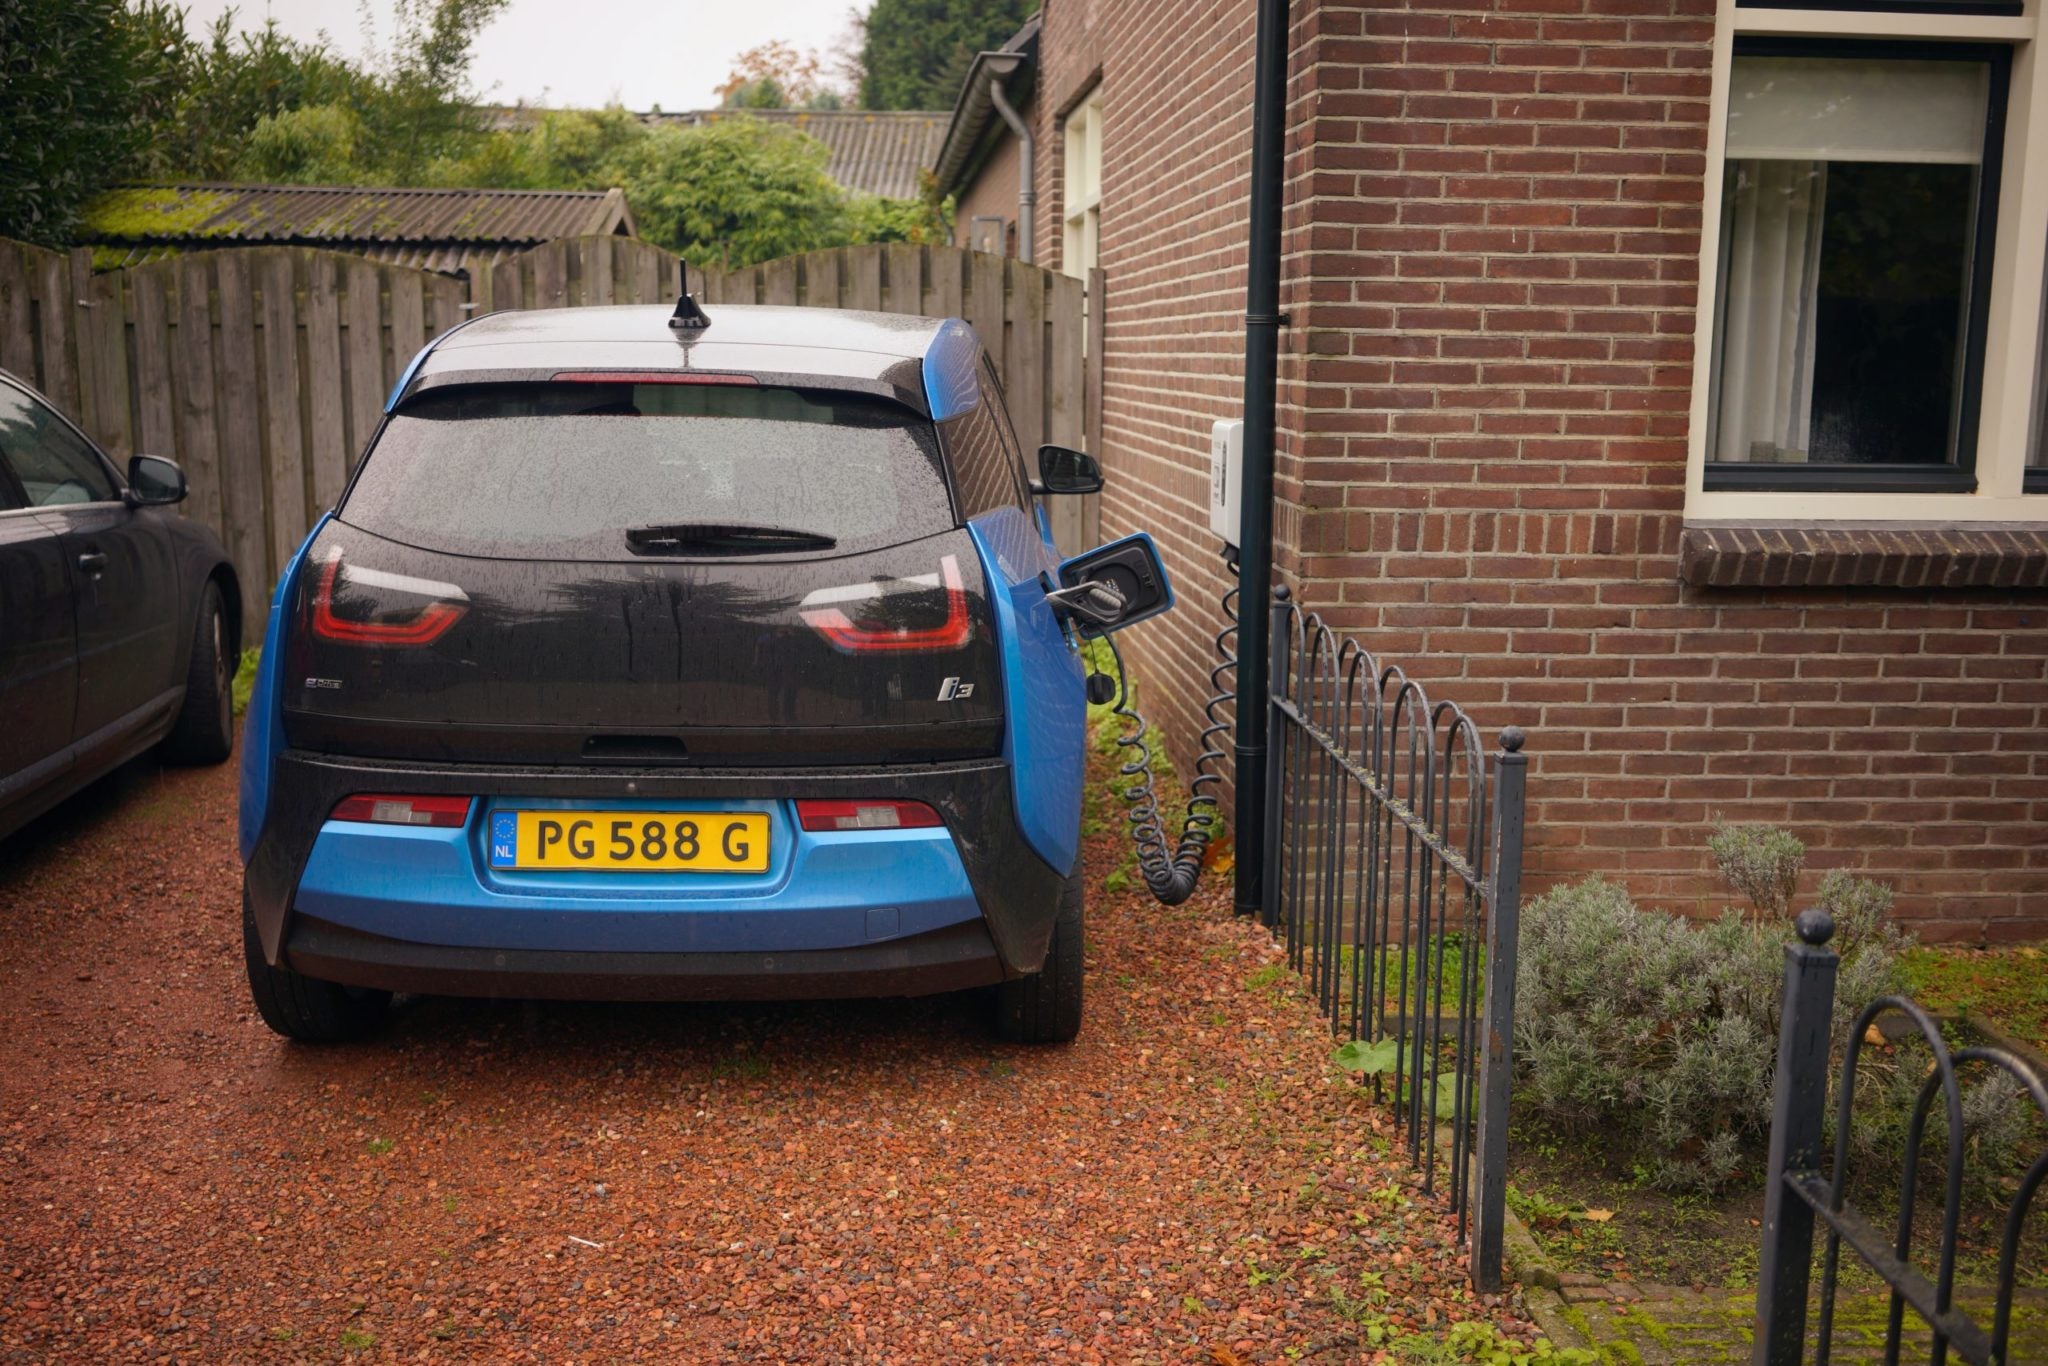 Gov't Raises Residential Electric Vehicle Chargepoint Funding, but Demand is Growing